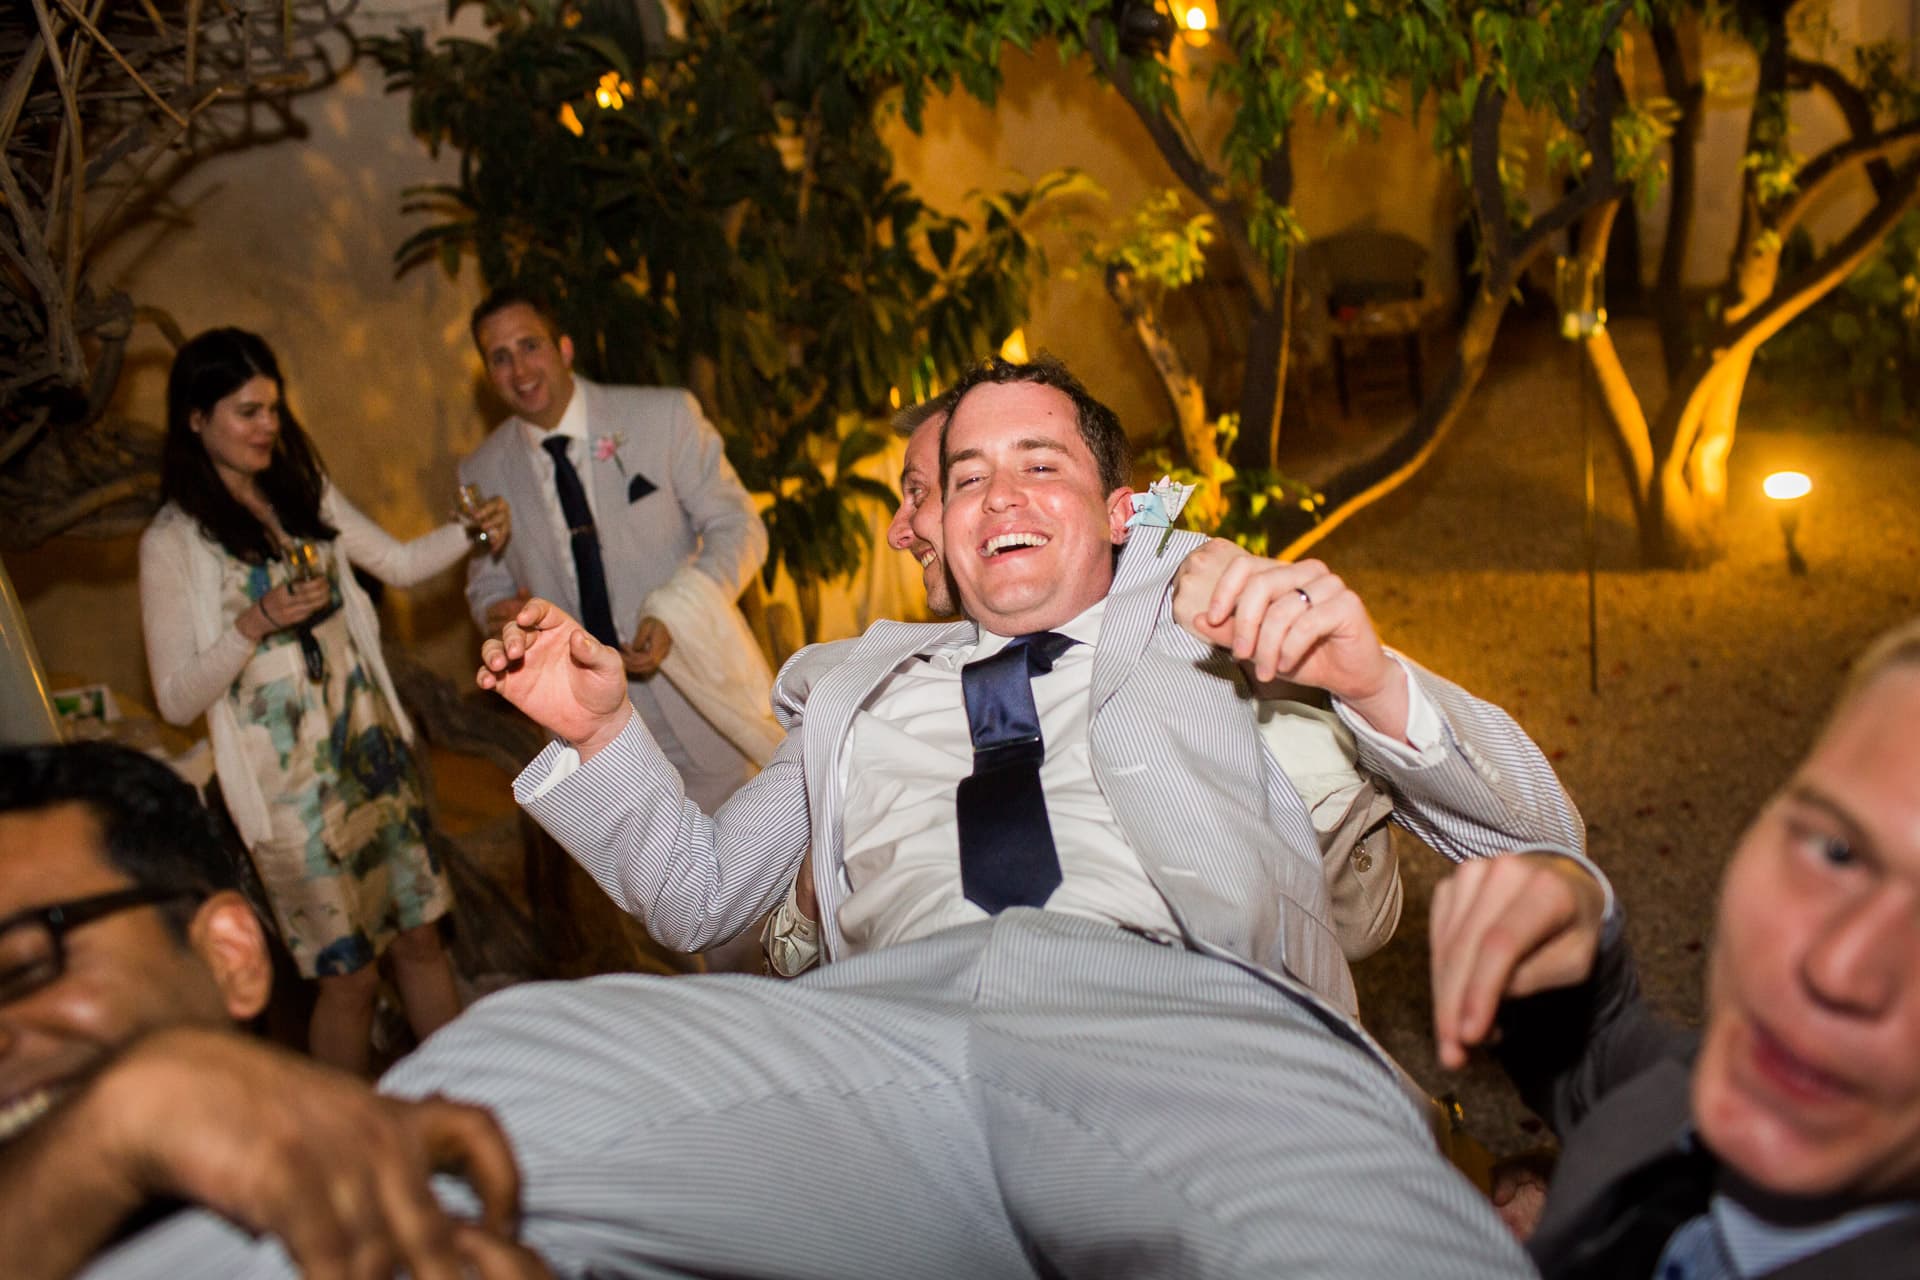 groom being lifted up